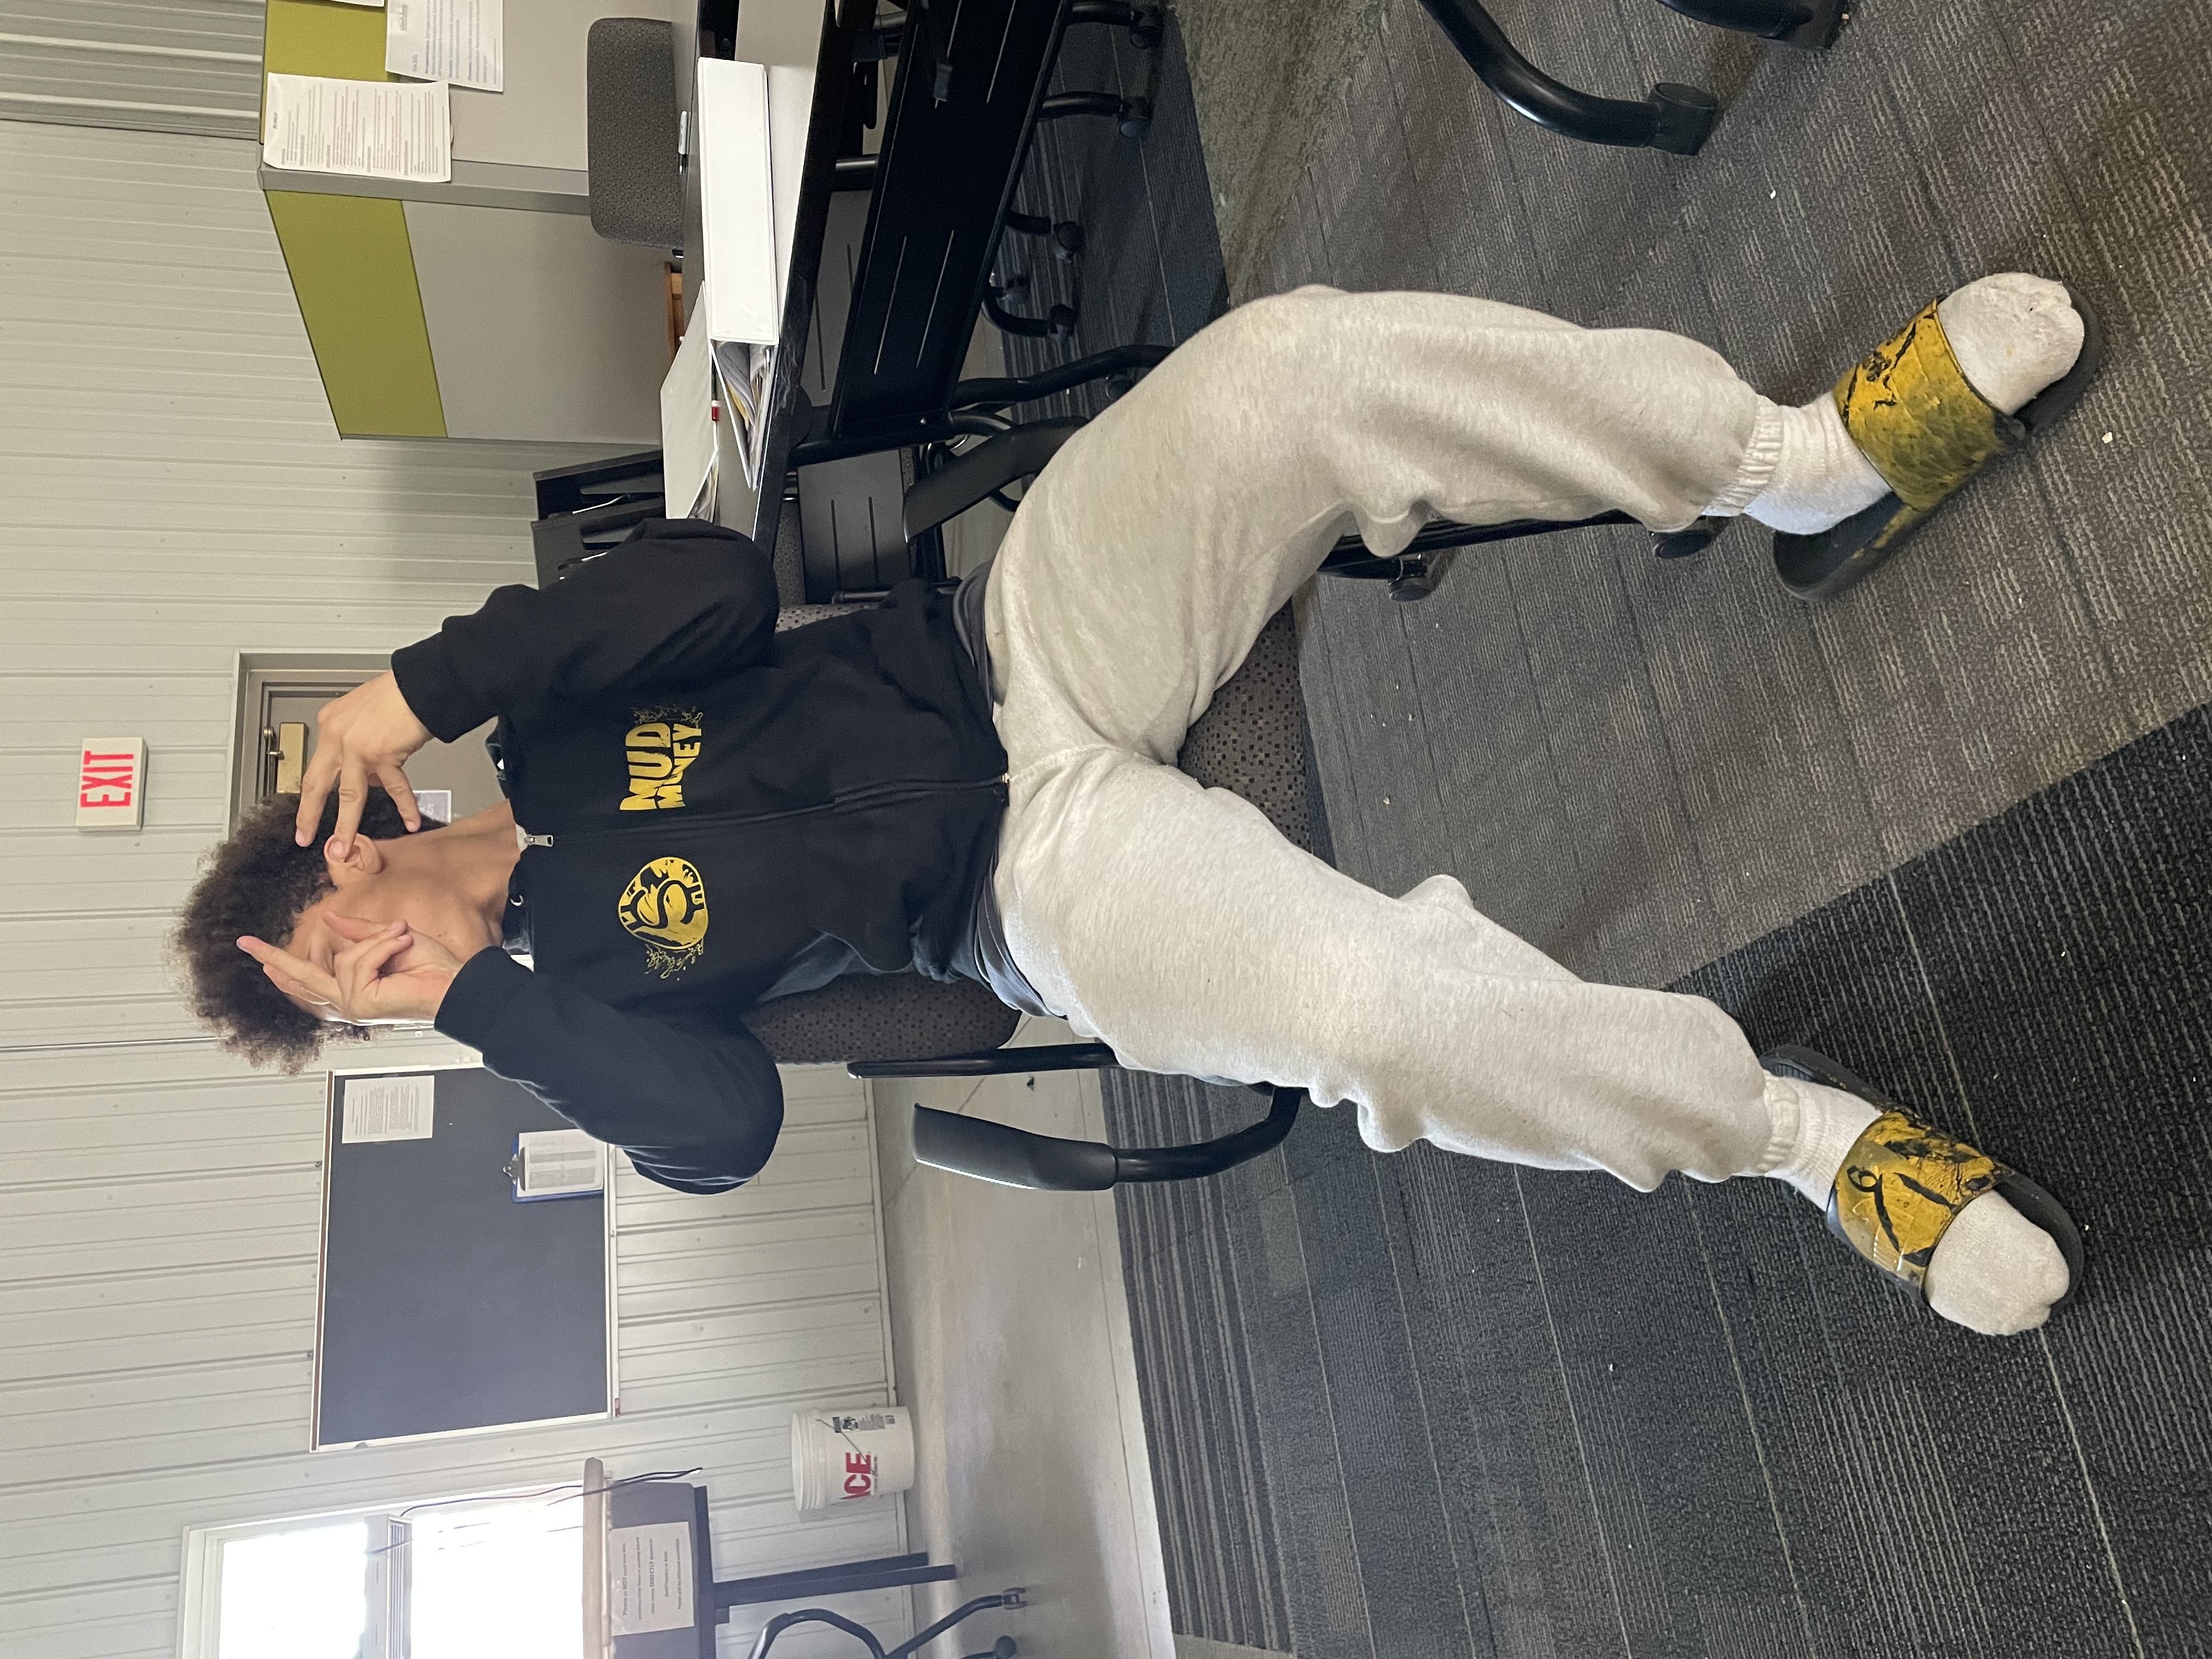 Student posing with their new "Mud Money" personal branded sweatshirt and slides